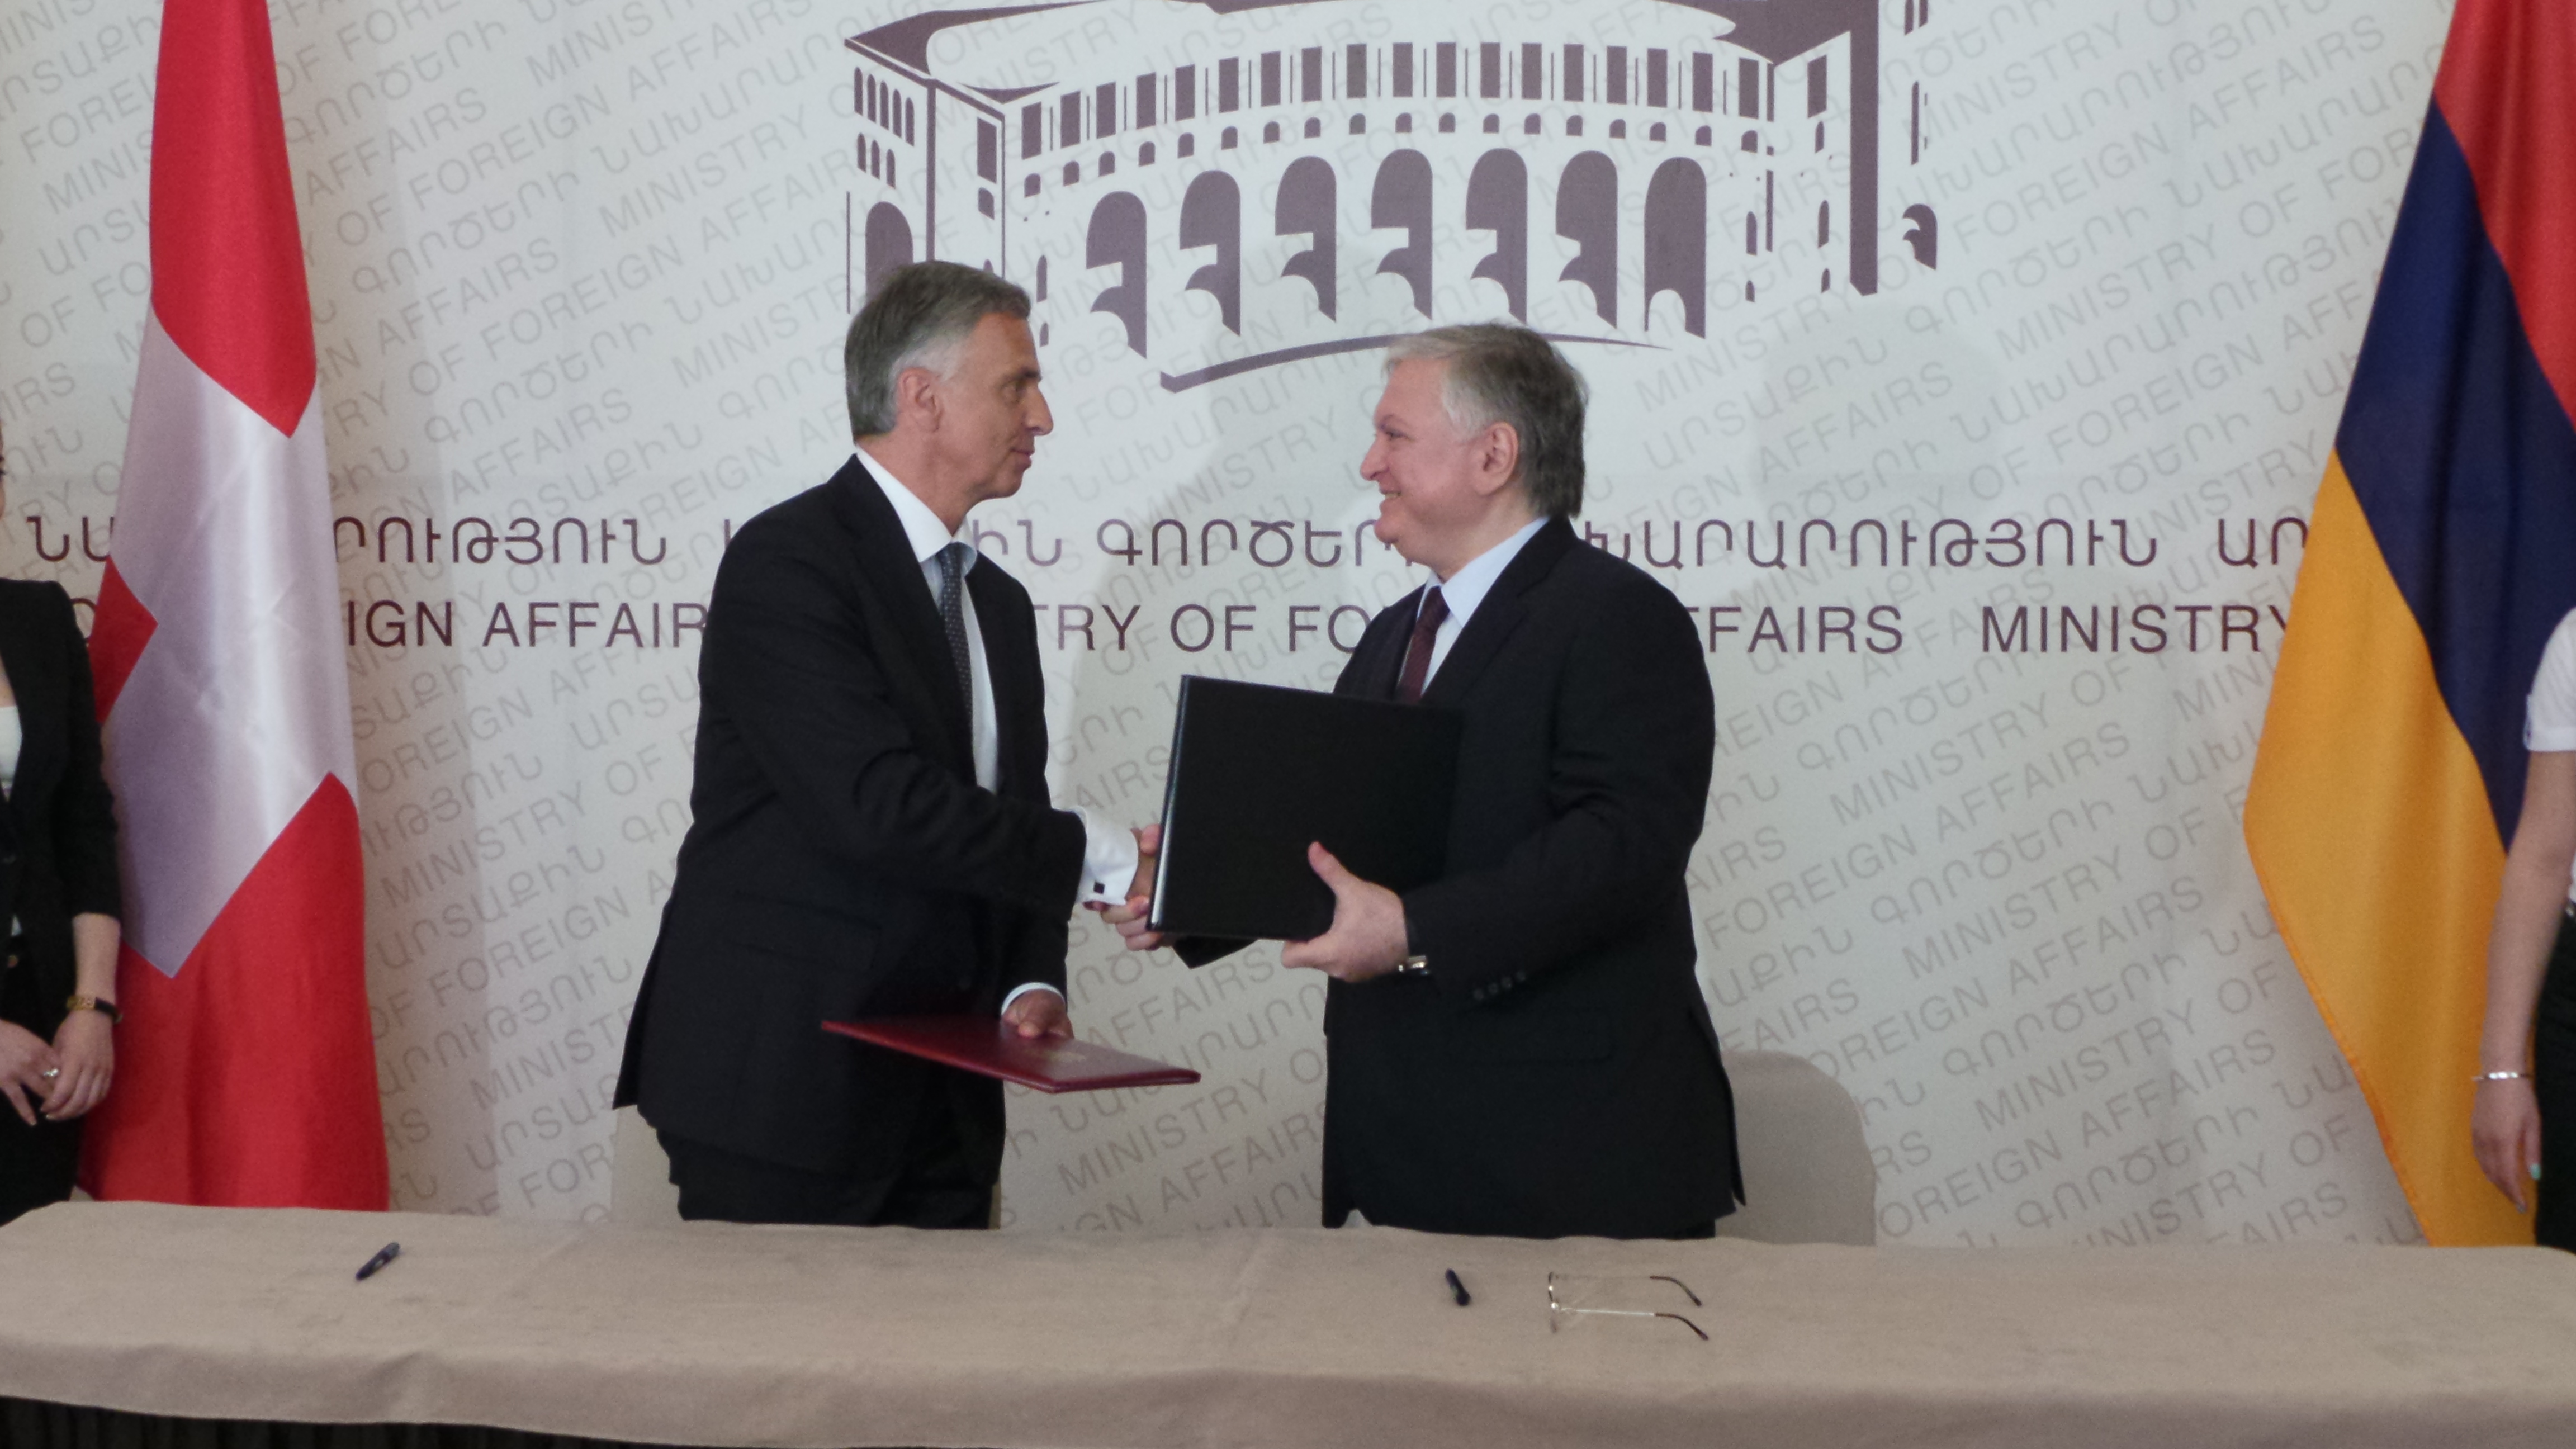 The President of the Swiss Confederation, Didier Burkhalter, and Armenian Foreign Minister Edouard Nalbandian signing a Memorandum of Understanding on collaboration between the foreign ministries of Switzerland and Armenia.